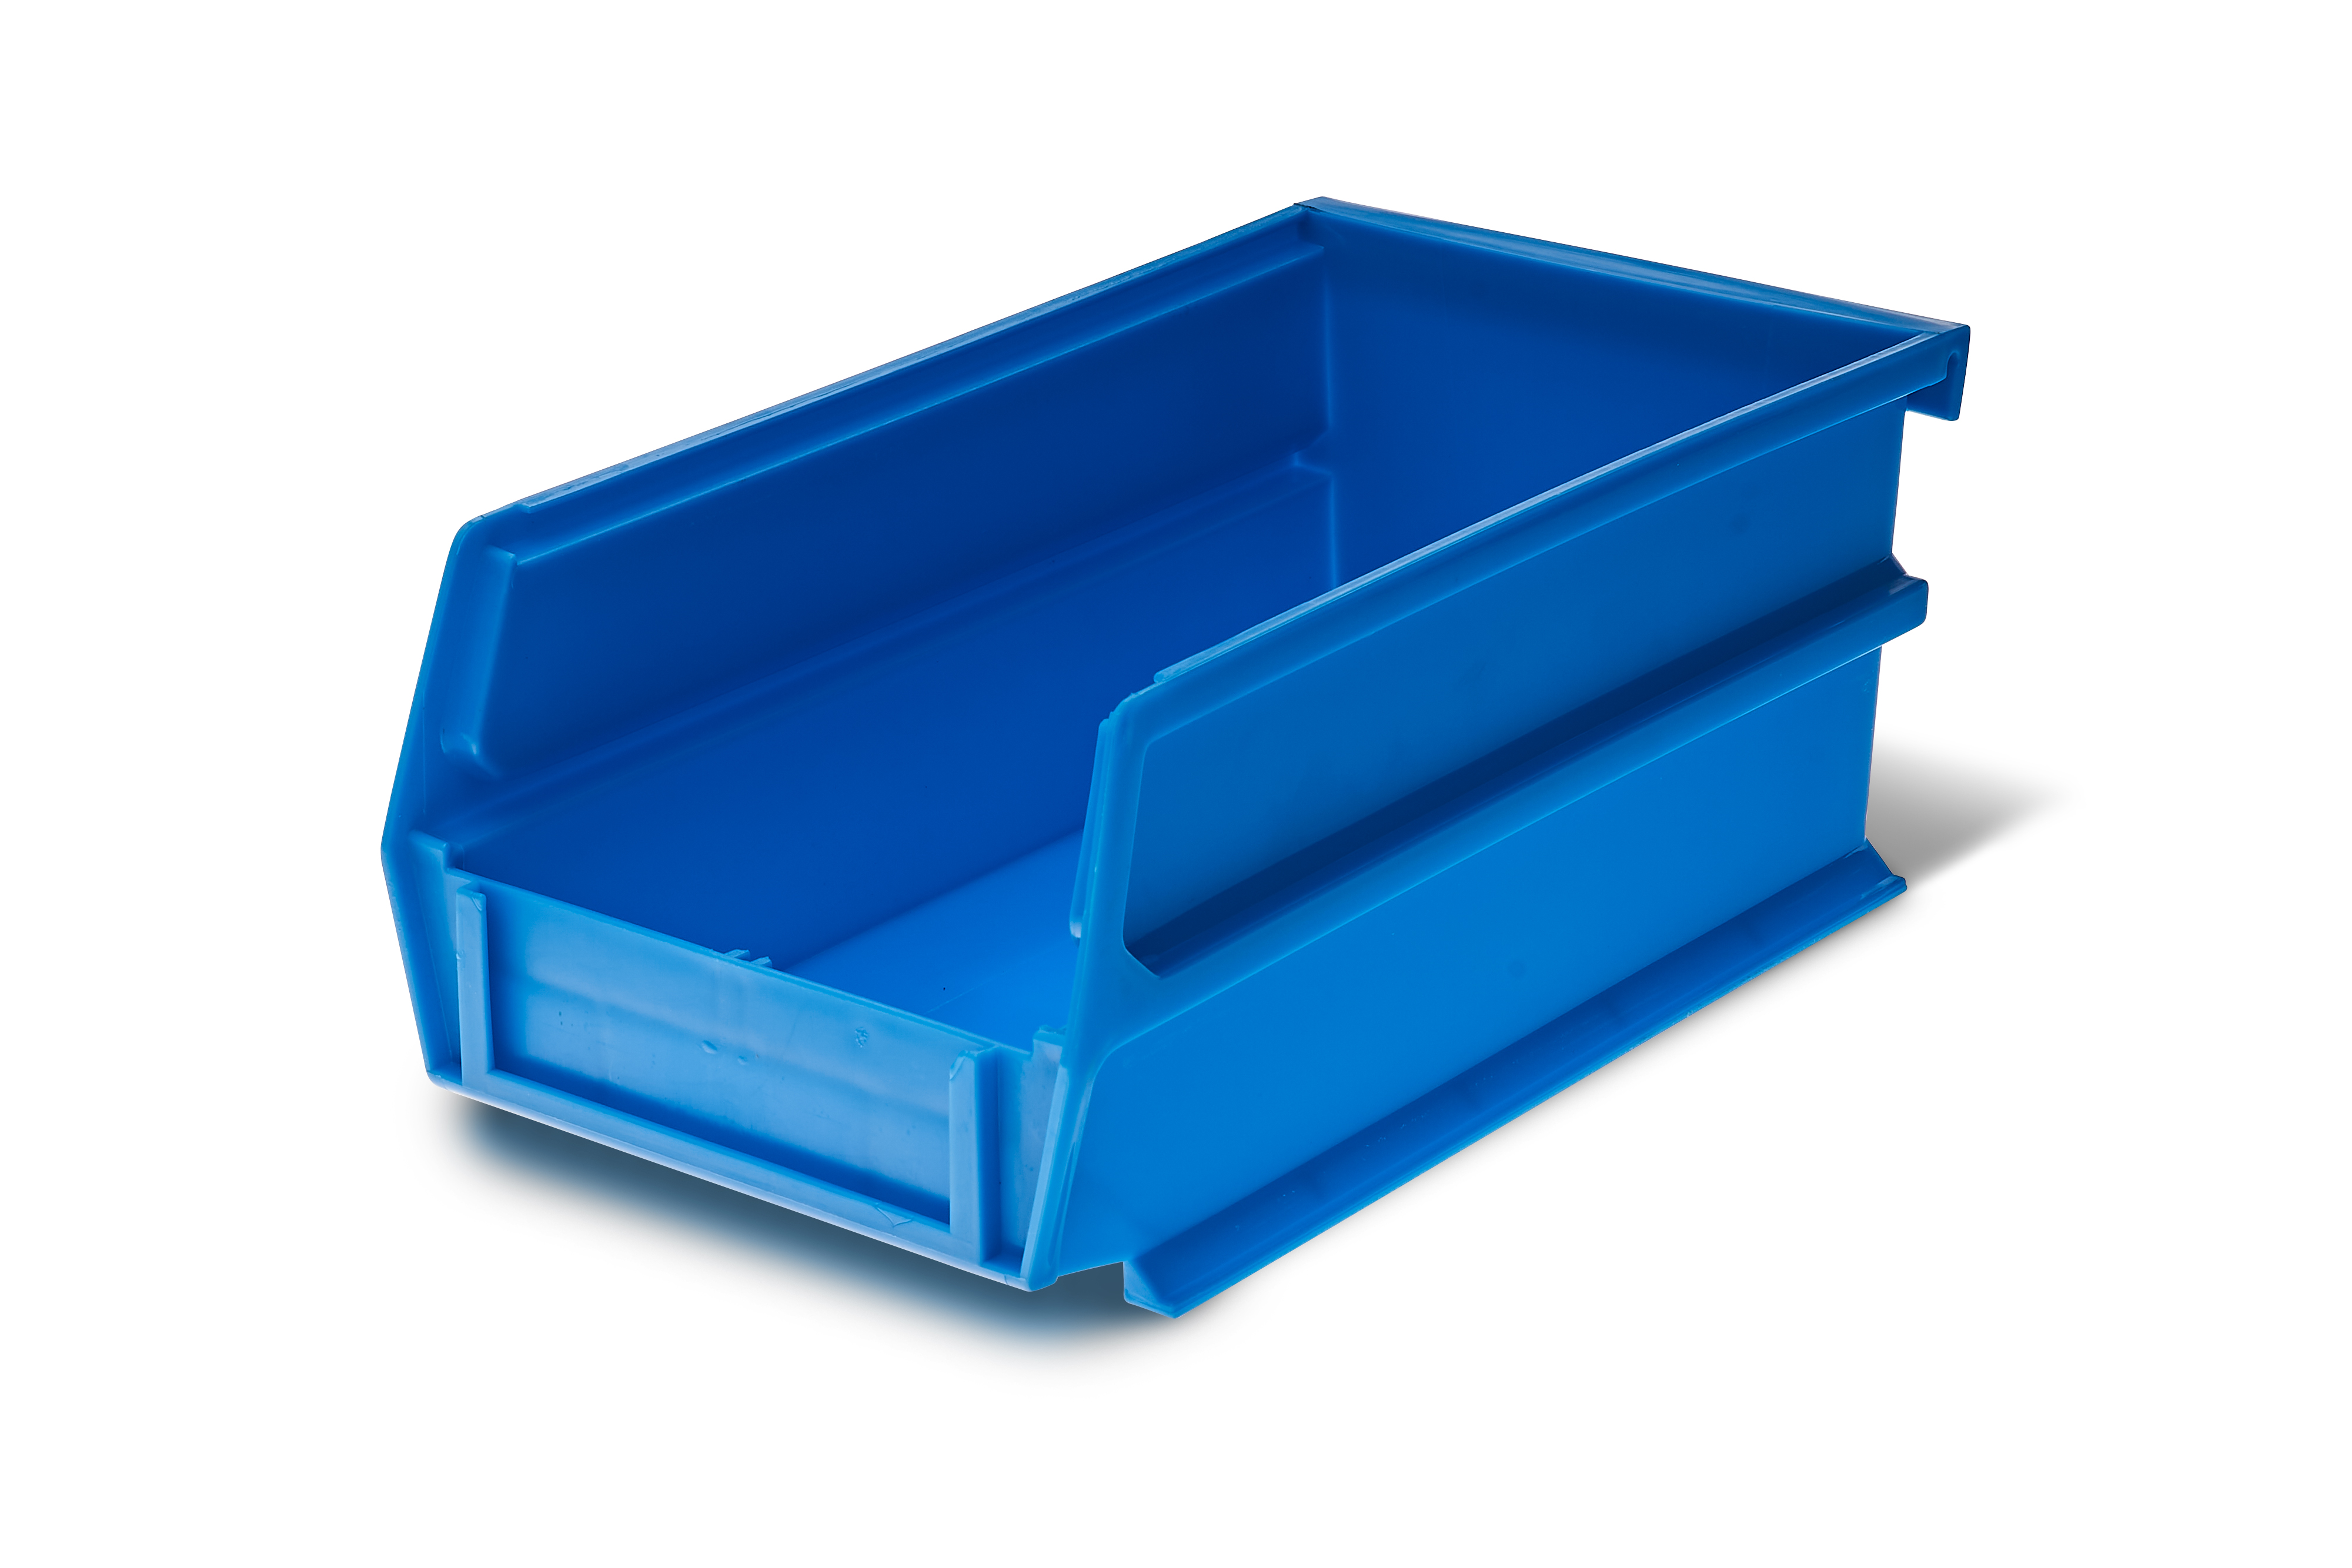 Triton Products® LocBin 26-Piece Wall Storage Unit with (12) 5-3/8"L x 4-1/8"W x 3"H YEL Bins & (12) 7-3/8"L x 4-1/8"W x 3"H Blue Bins, 24ct, Wall Mount Rails 8-3/4"L with Hardware, 2pk - image 3 of 7